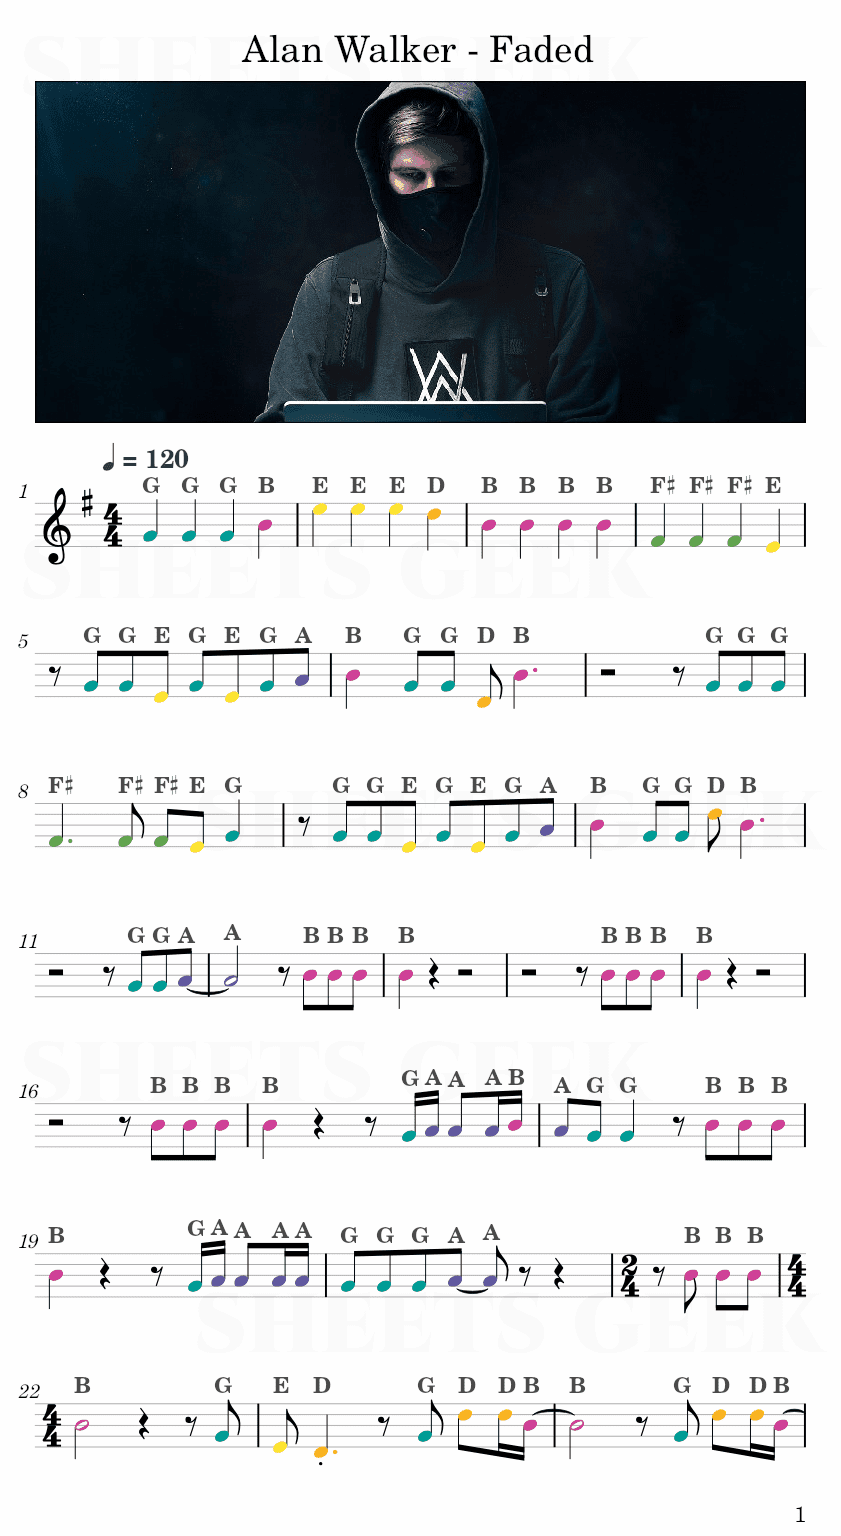 Alan Walker - Faded Flute Easy Sheets Music for piano, keyboard, flute, violin, sax, celllo 1